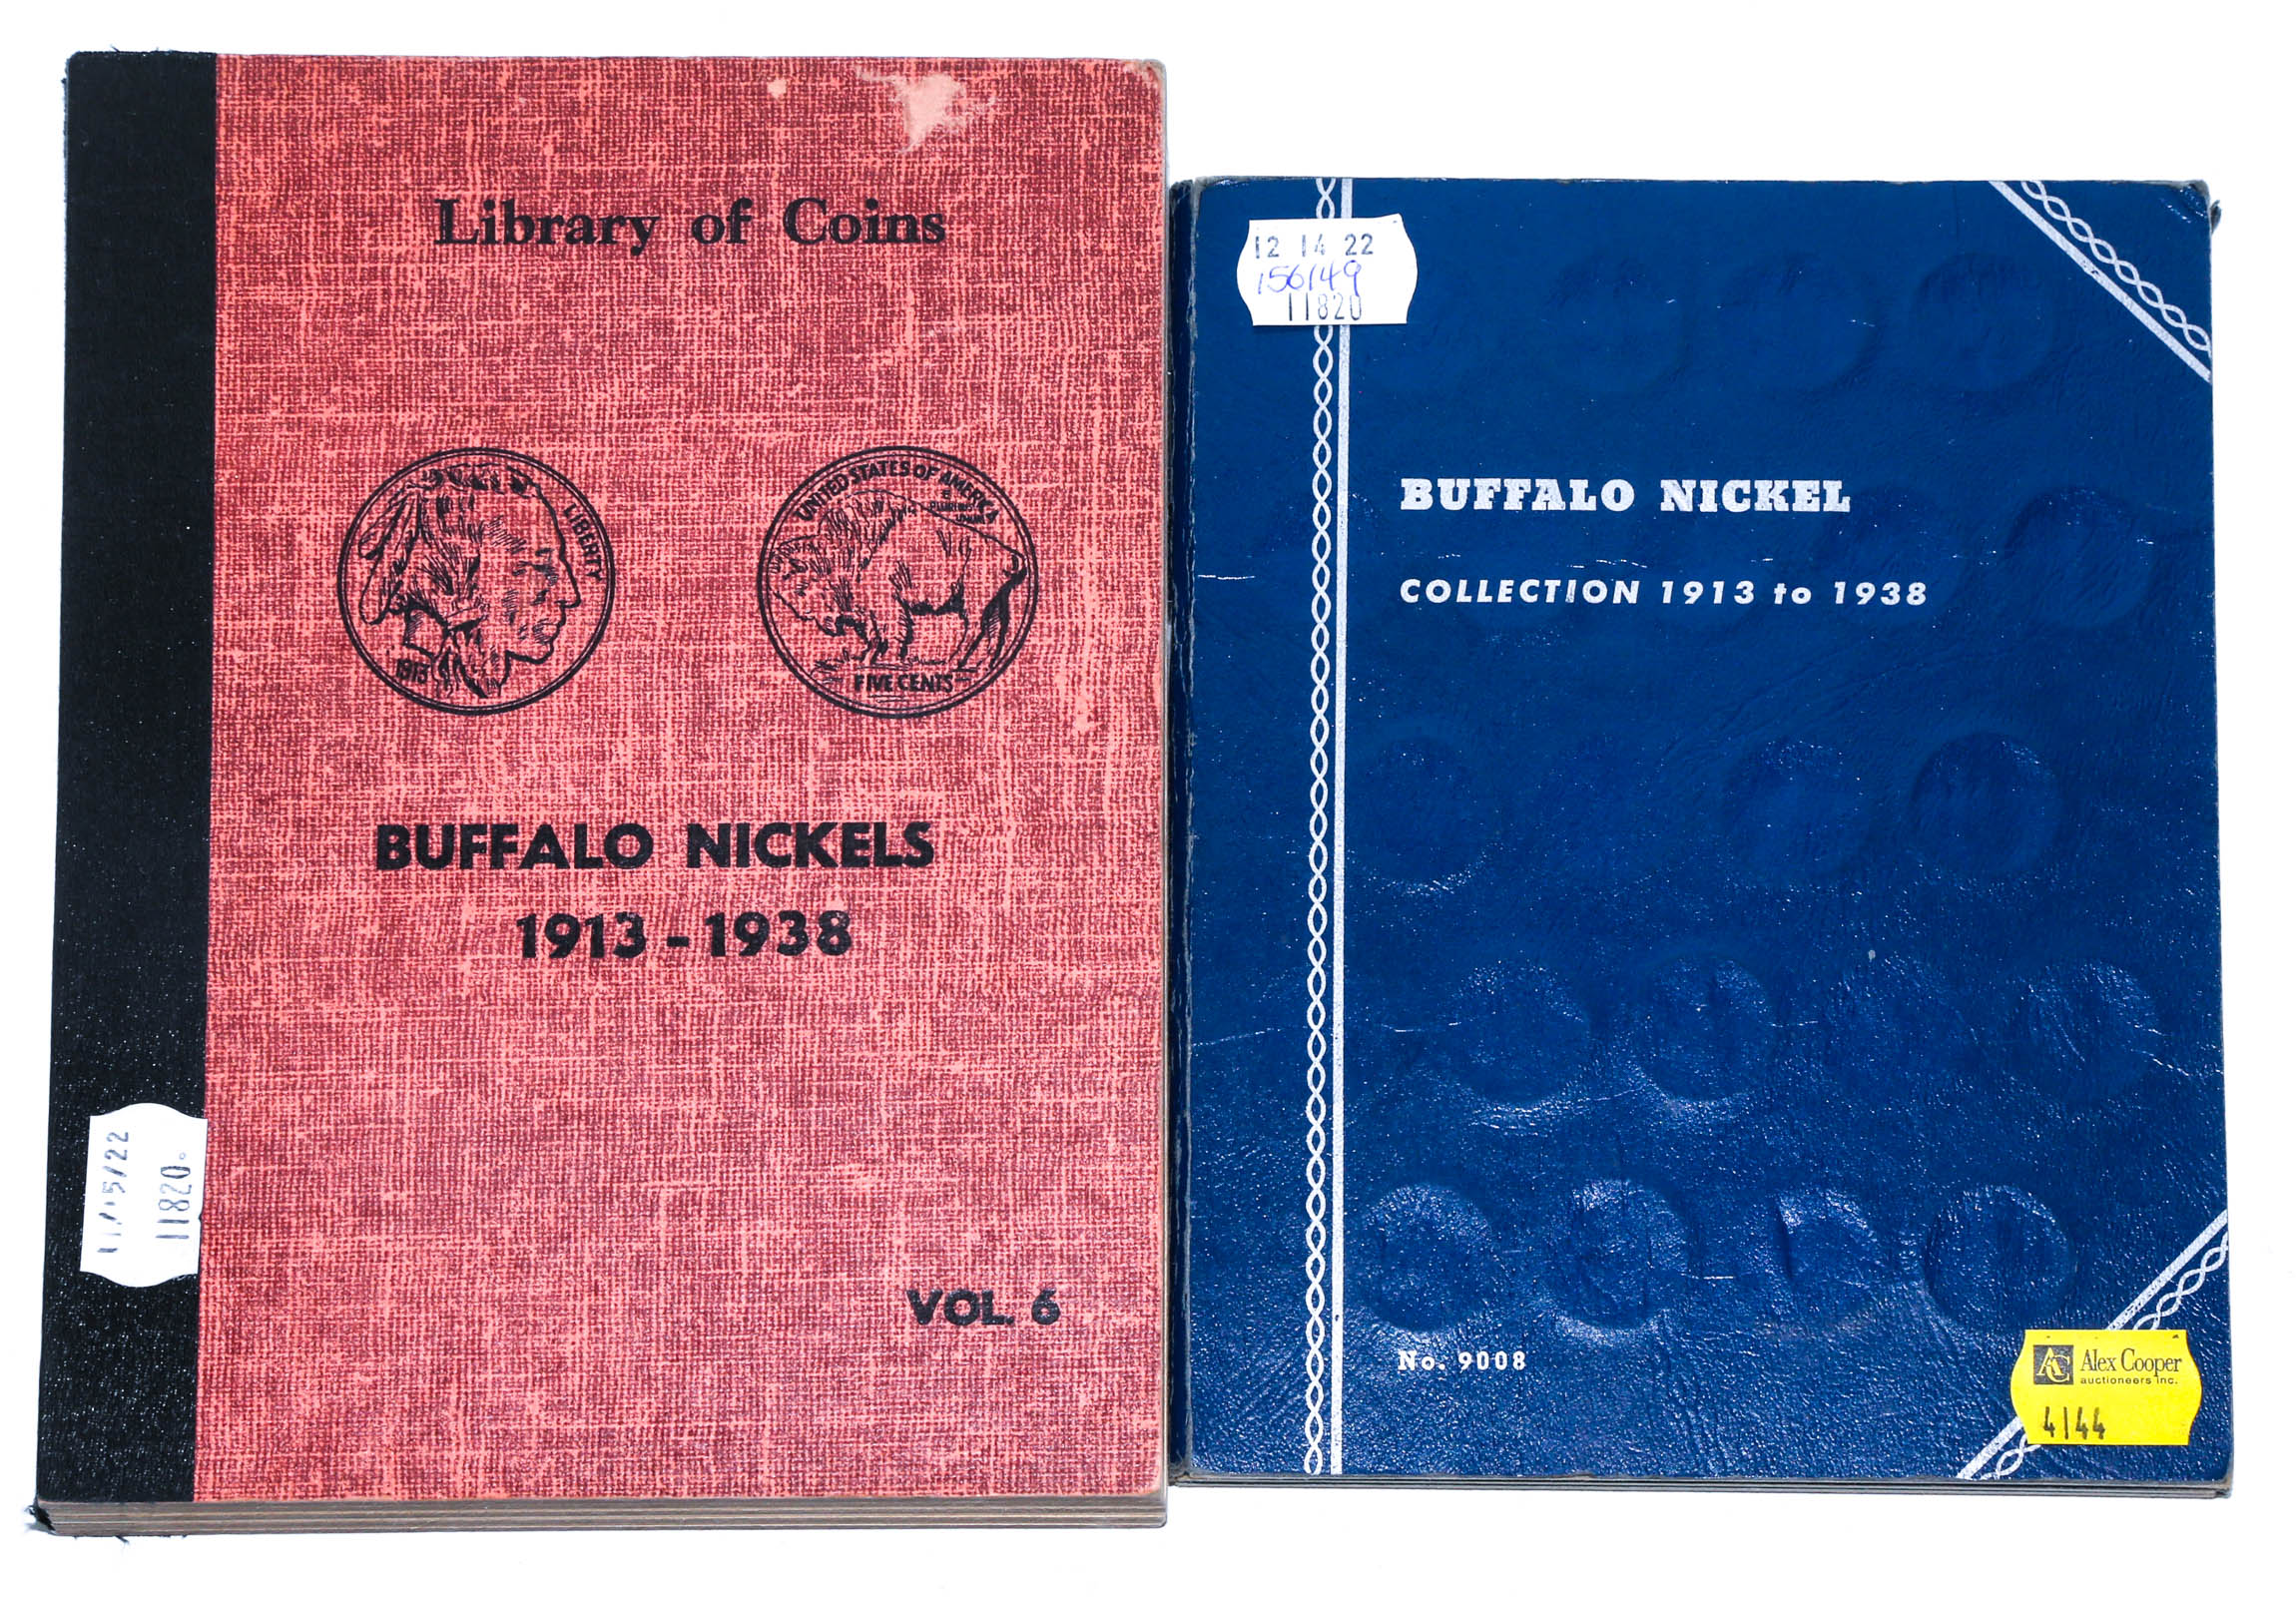 TWO BUFFALO NICKEL SETS - ONE COMPLETE